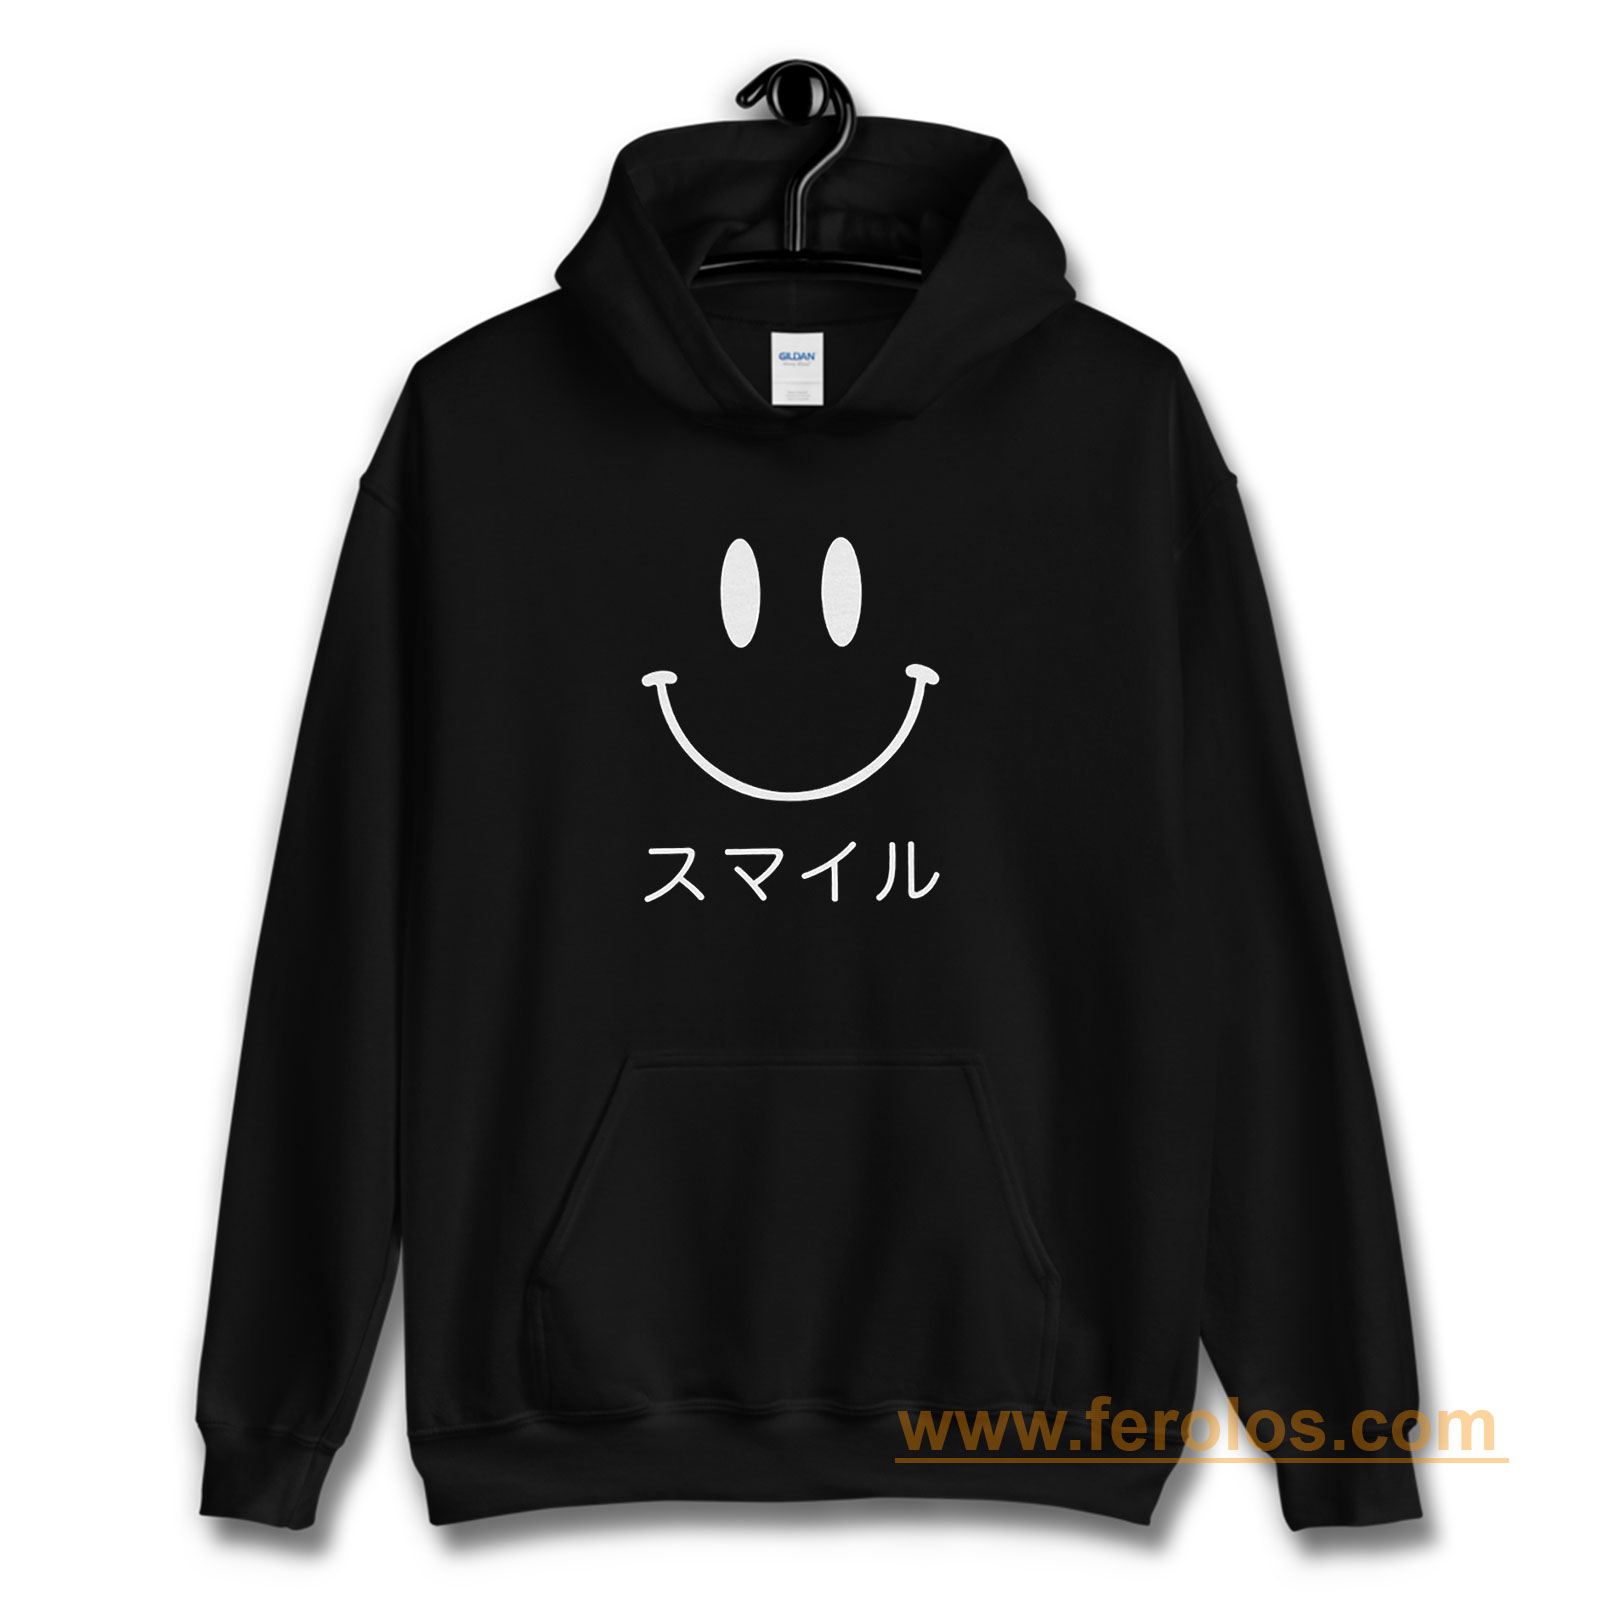 Details more than 169 anime smiley face - in.eteachers